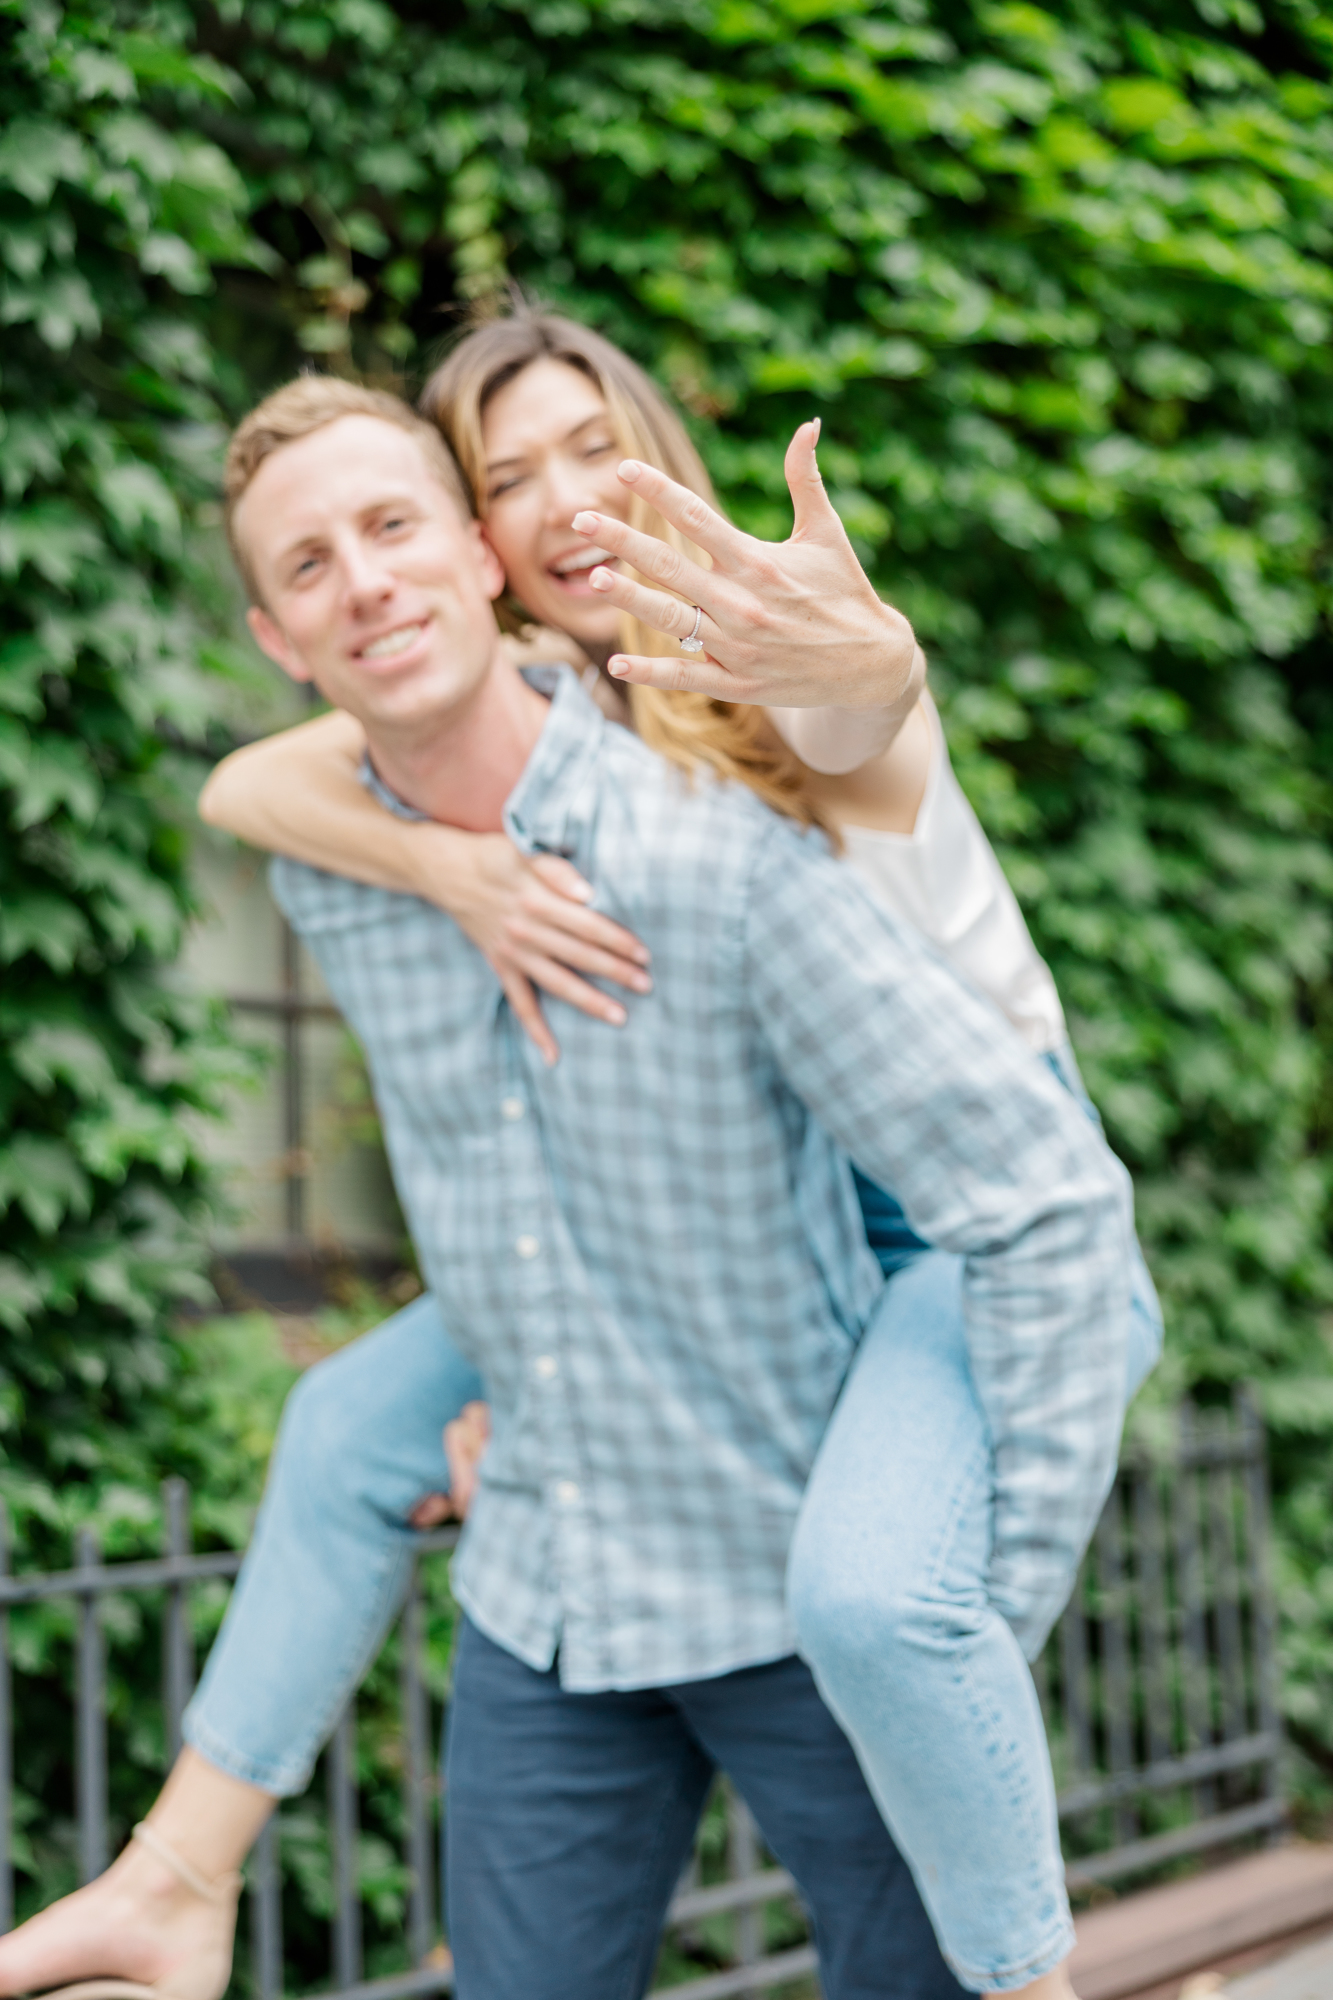 Lively Summer Engagement Photography in the West Village